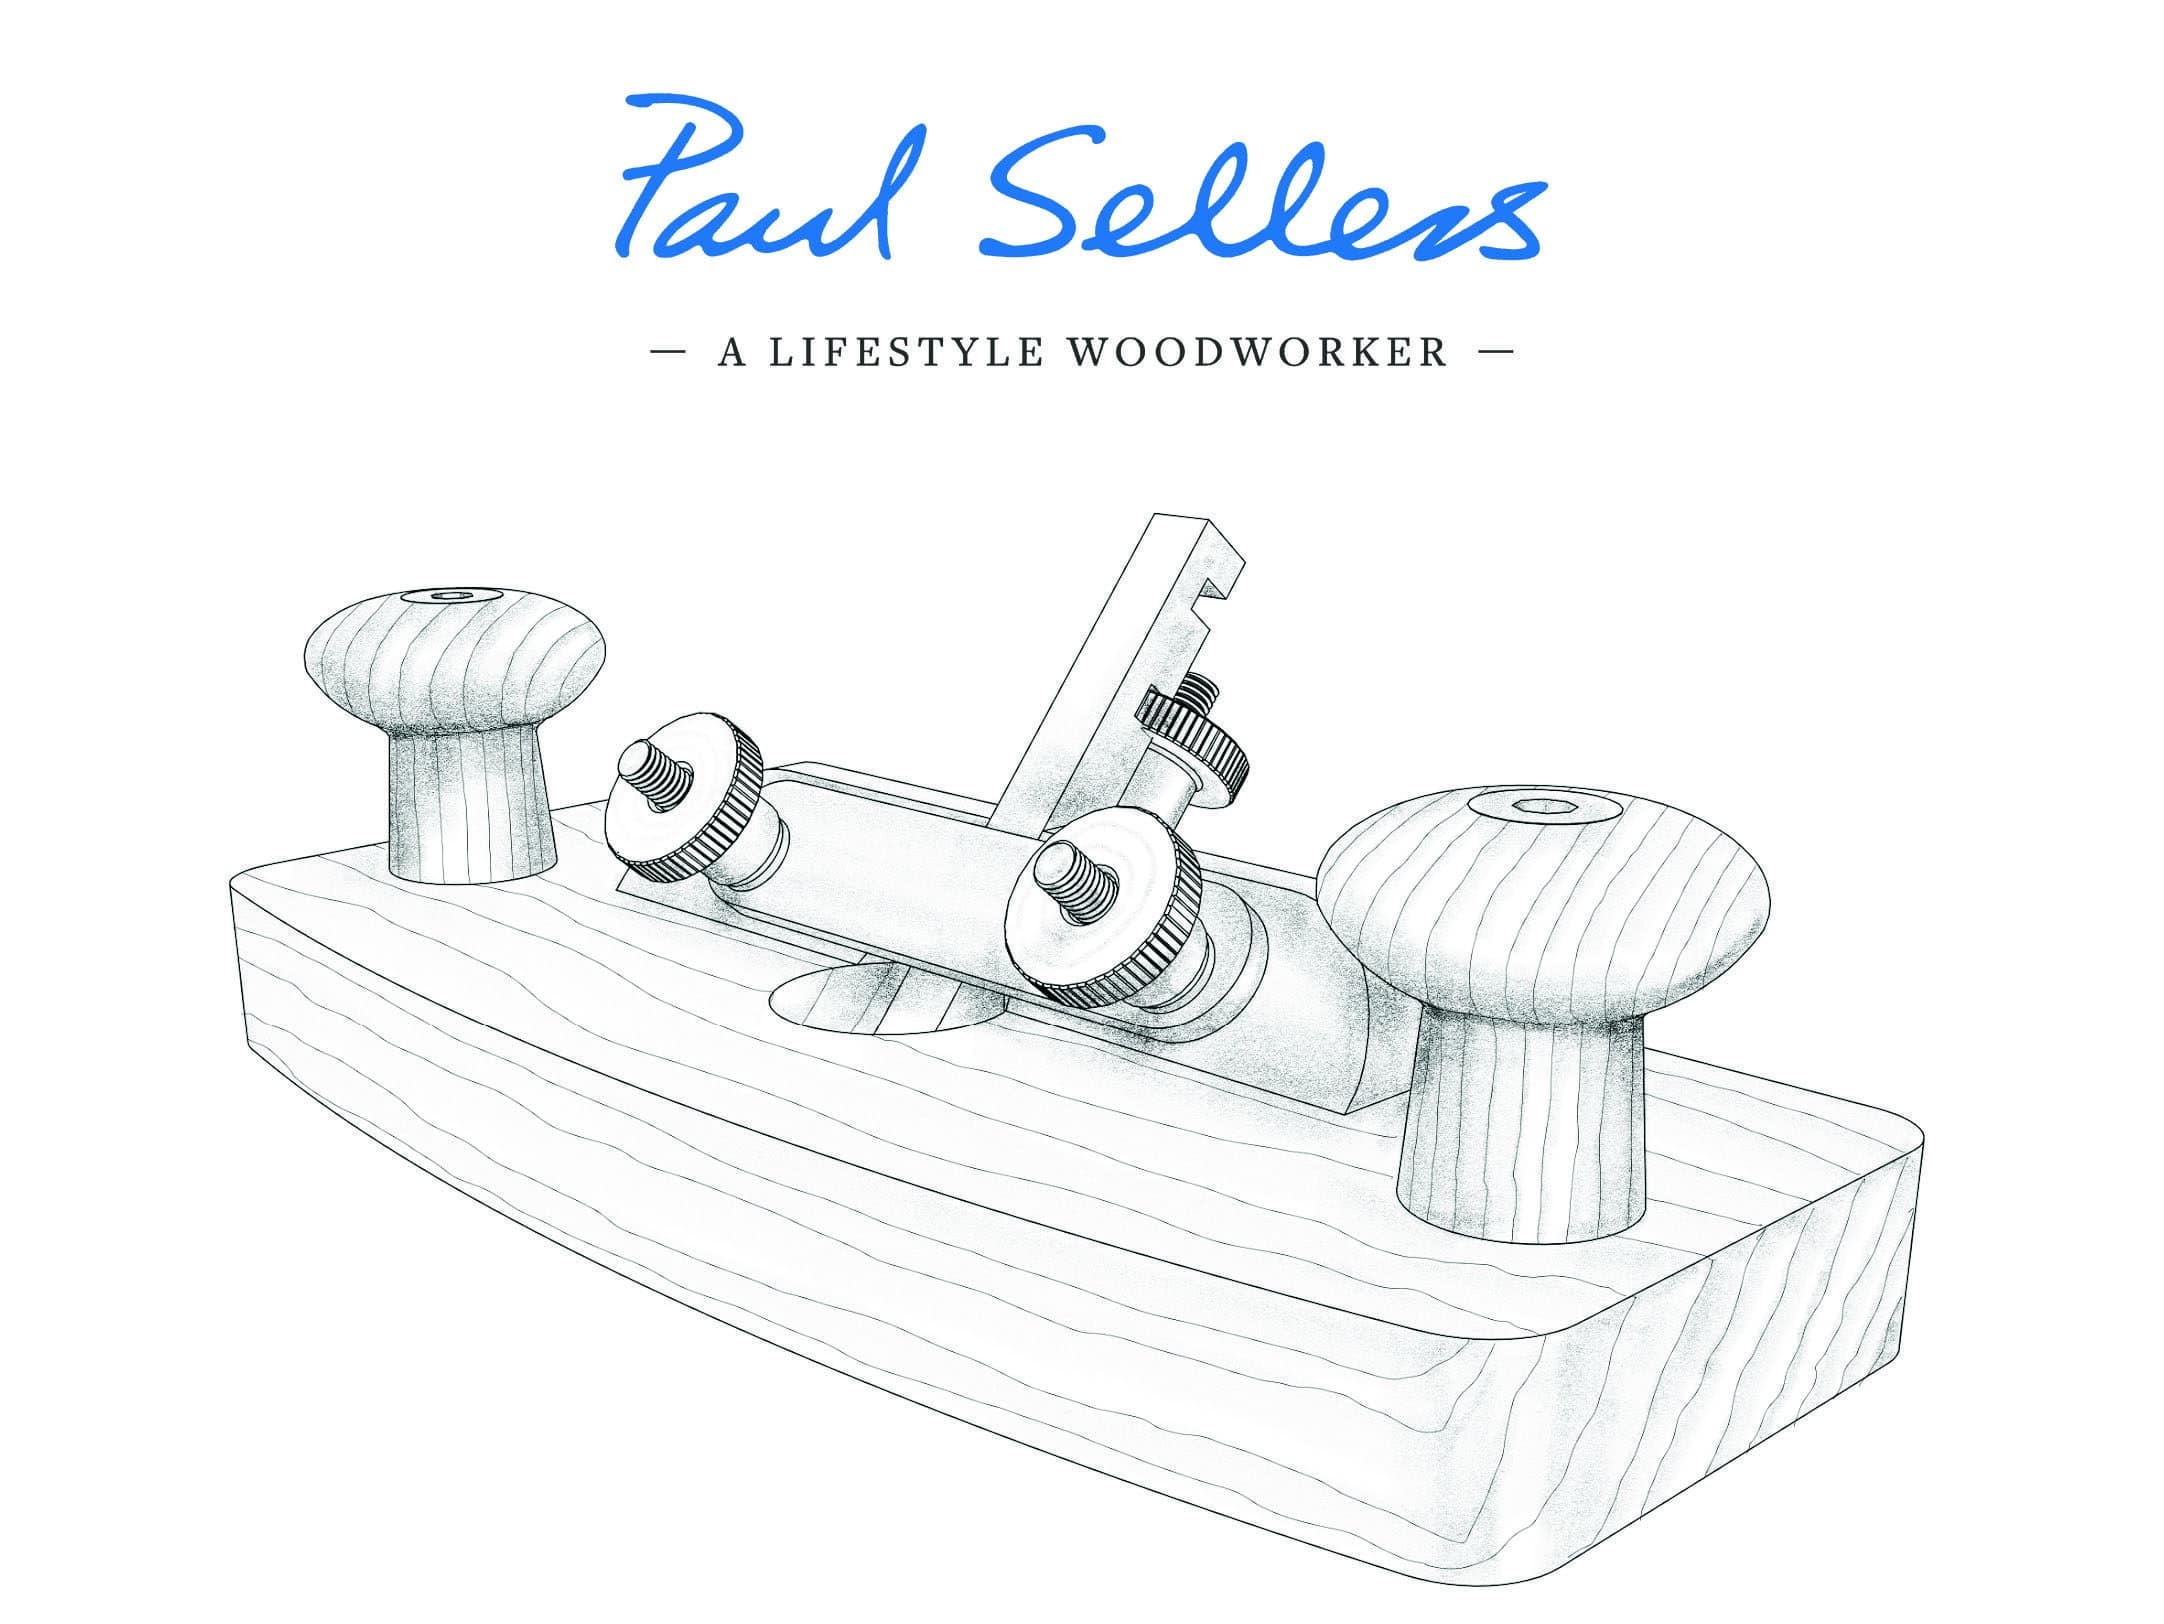 An image that has text which says Paul Sellers and then a drawing of the router plane followed by the text The Paul Sellers Router Plane.